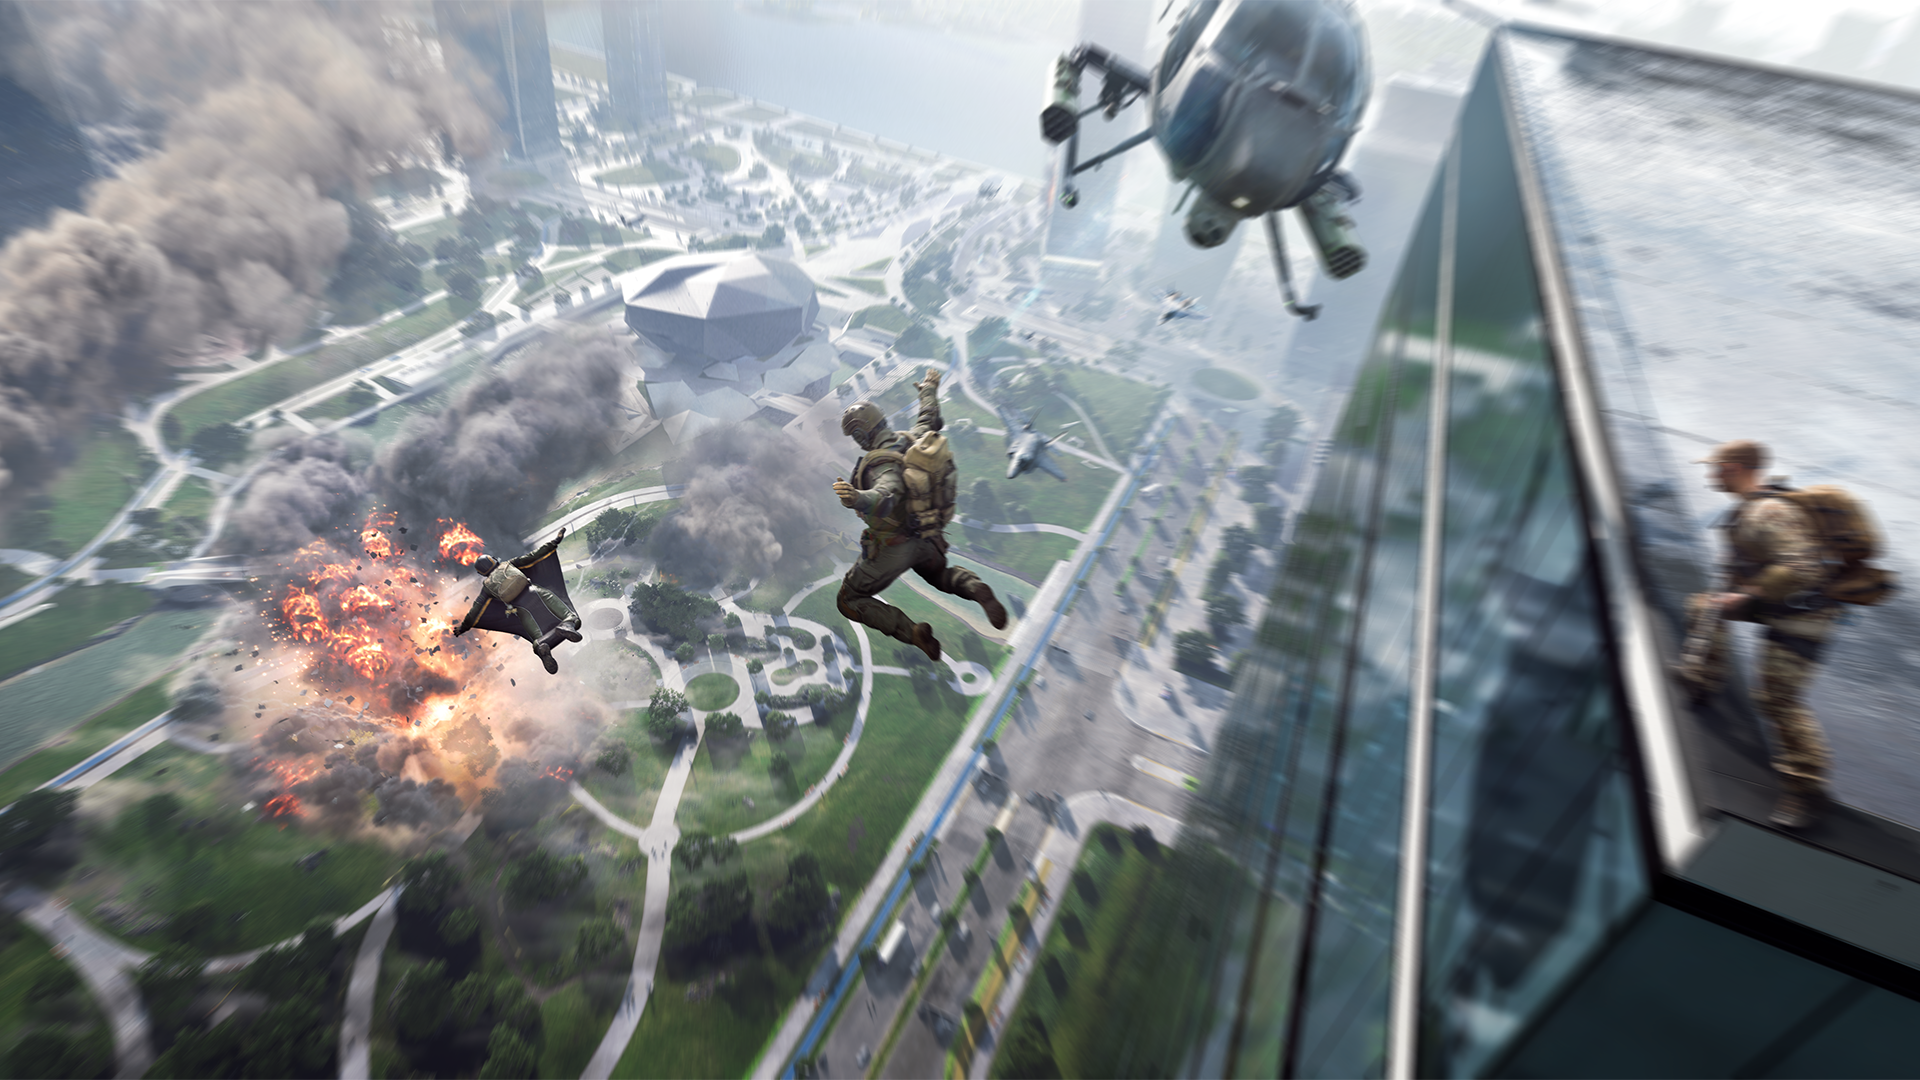 Image of Jumping off Building from Battlefield 2042